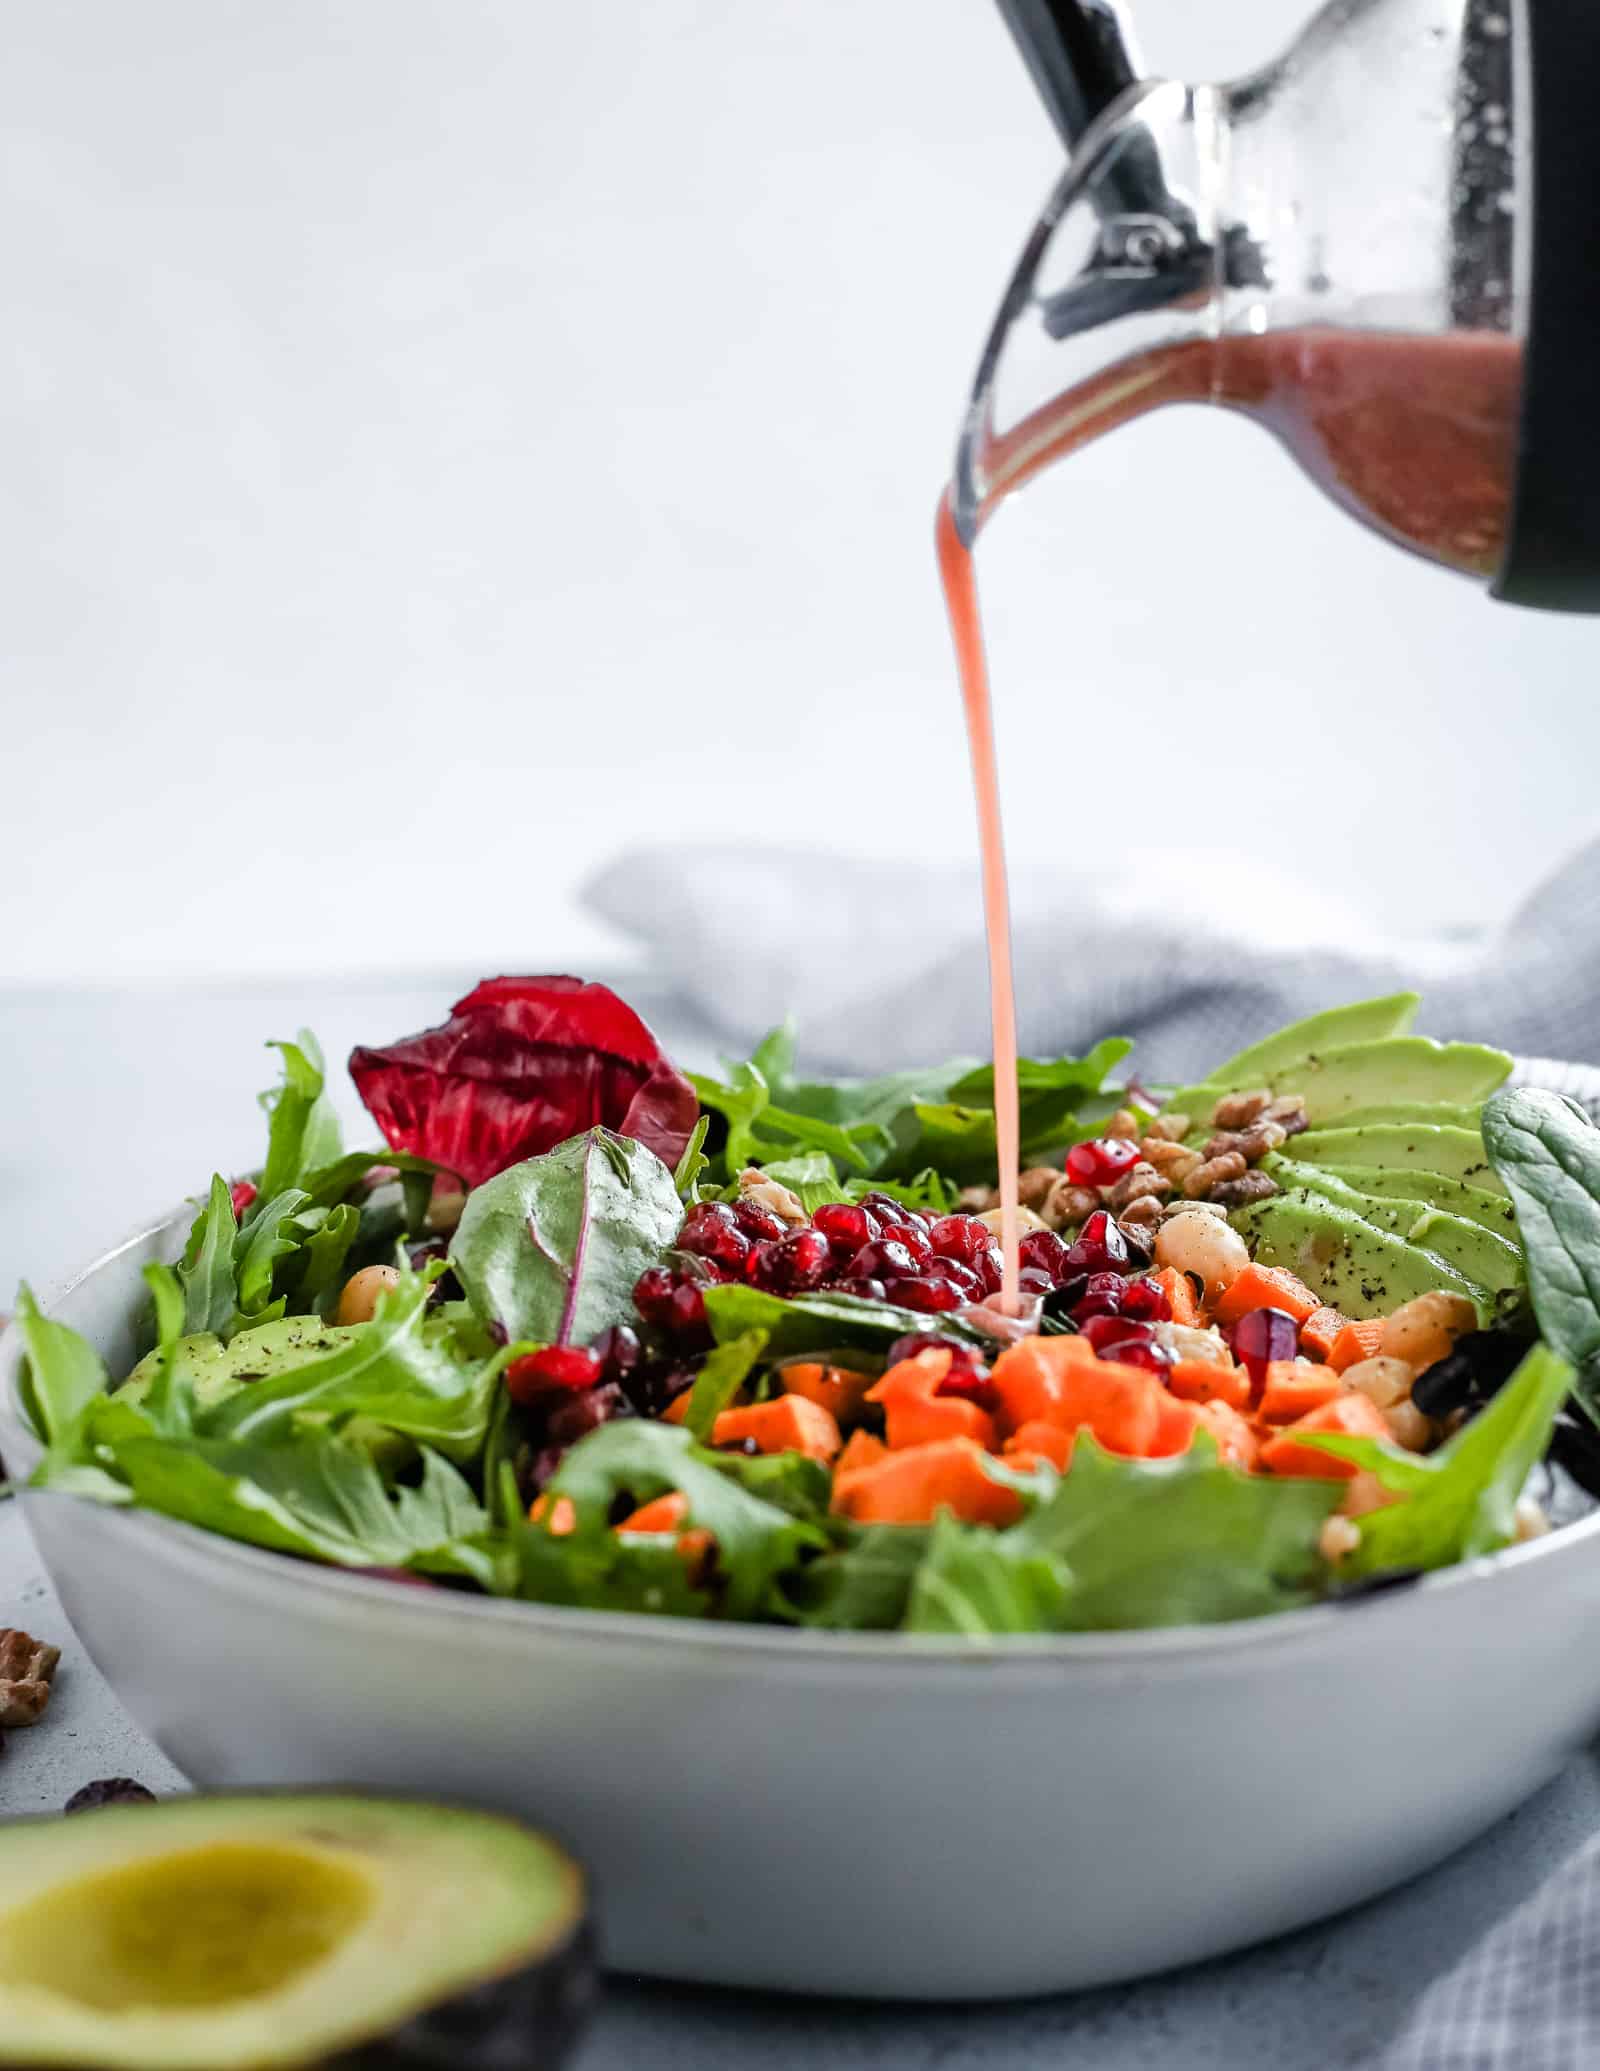 Colorful salad with a salad dressing shaker pouring a creamy pomegranate dressing on top